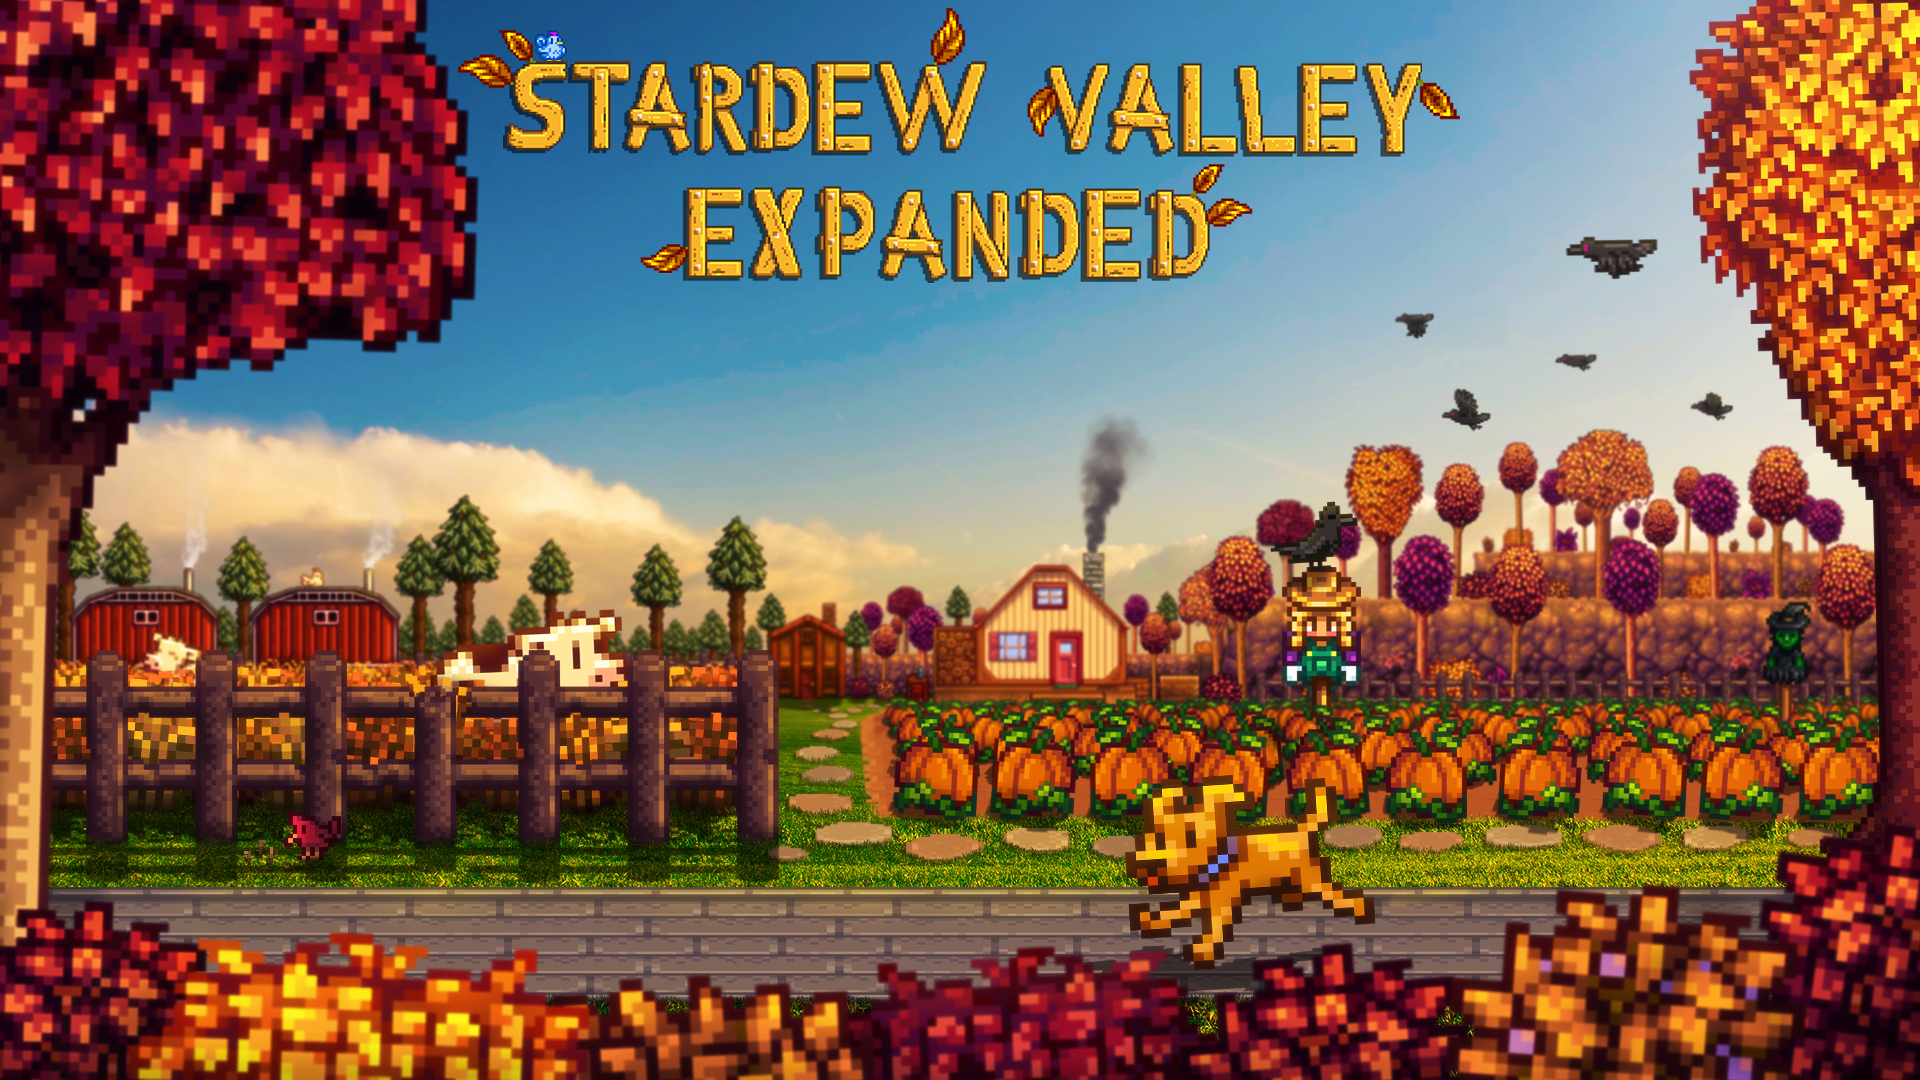 1920x1080 Stardew Valley Expanded new cover art at Stardew Valley Nexus Mods and community